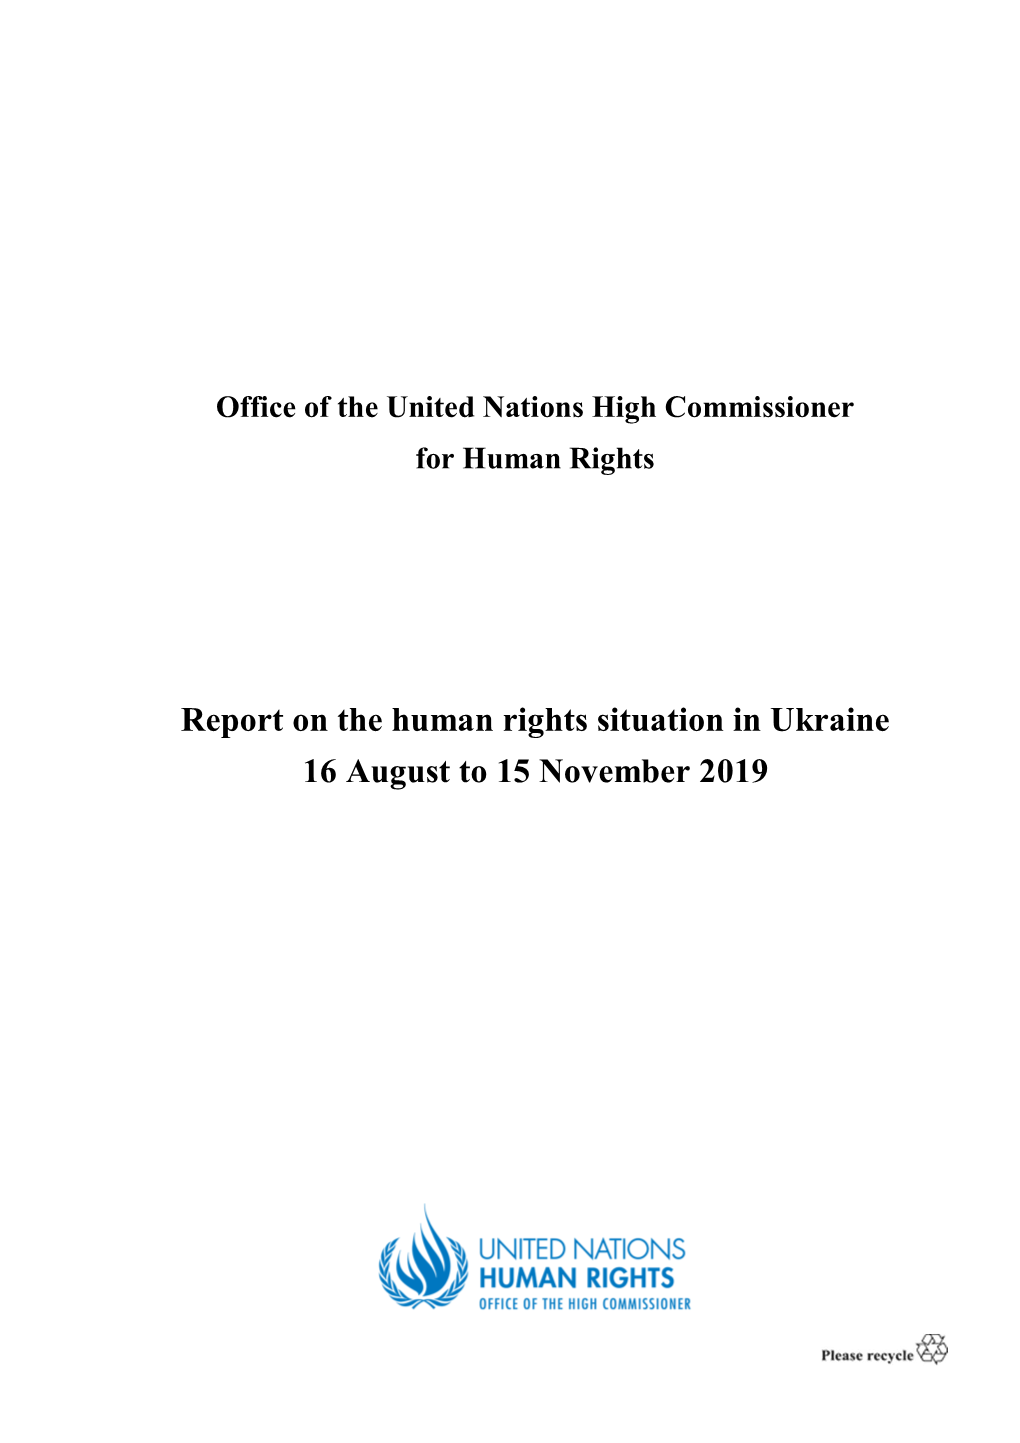 Report on the Human Rights Situation in Ukraine 16 August to 15 November 2019